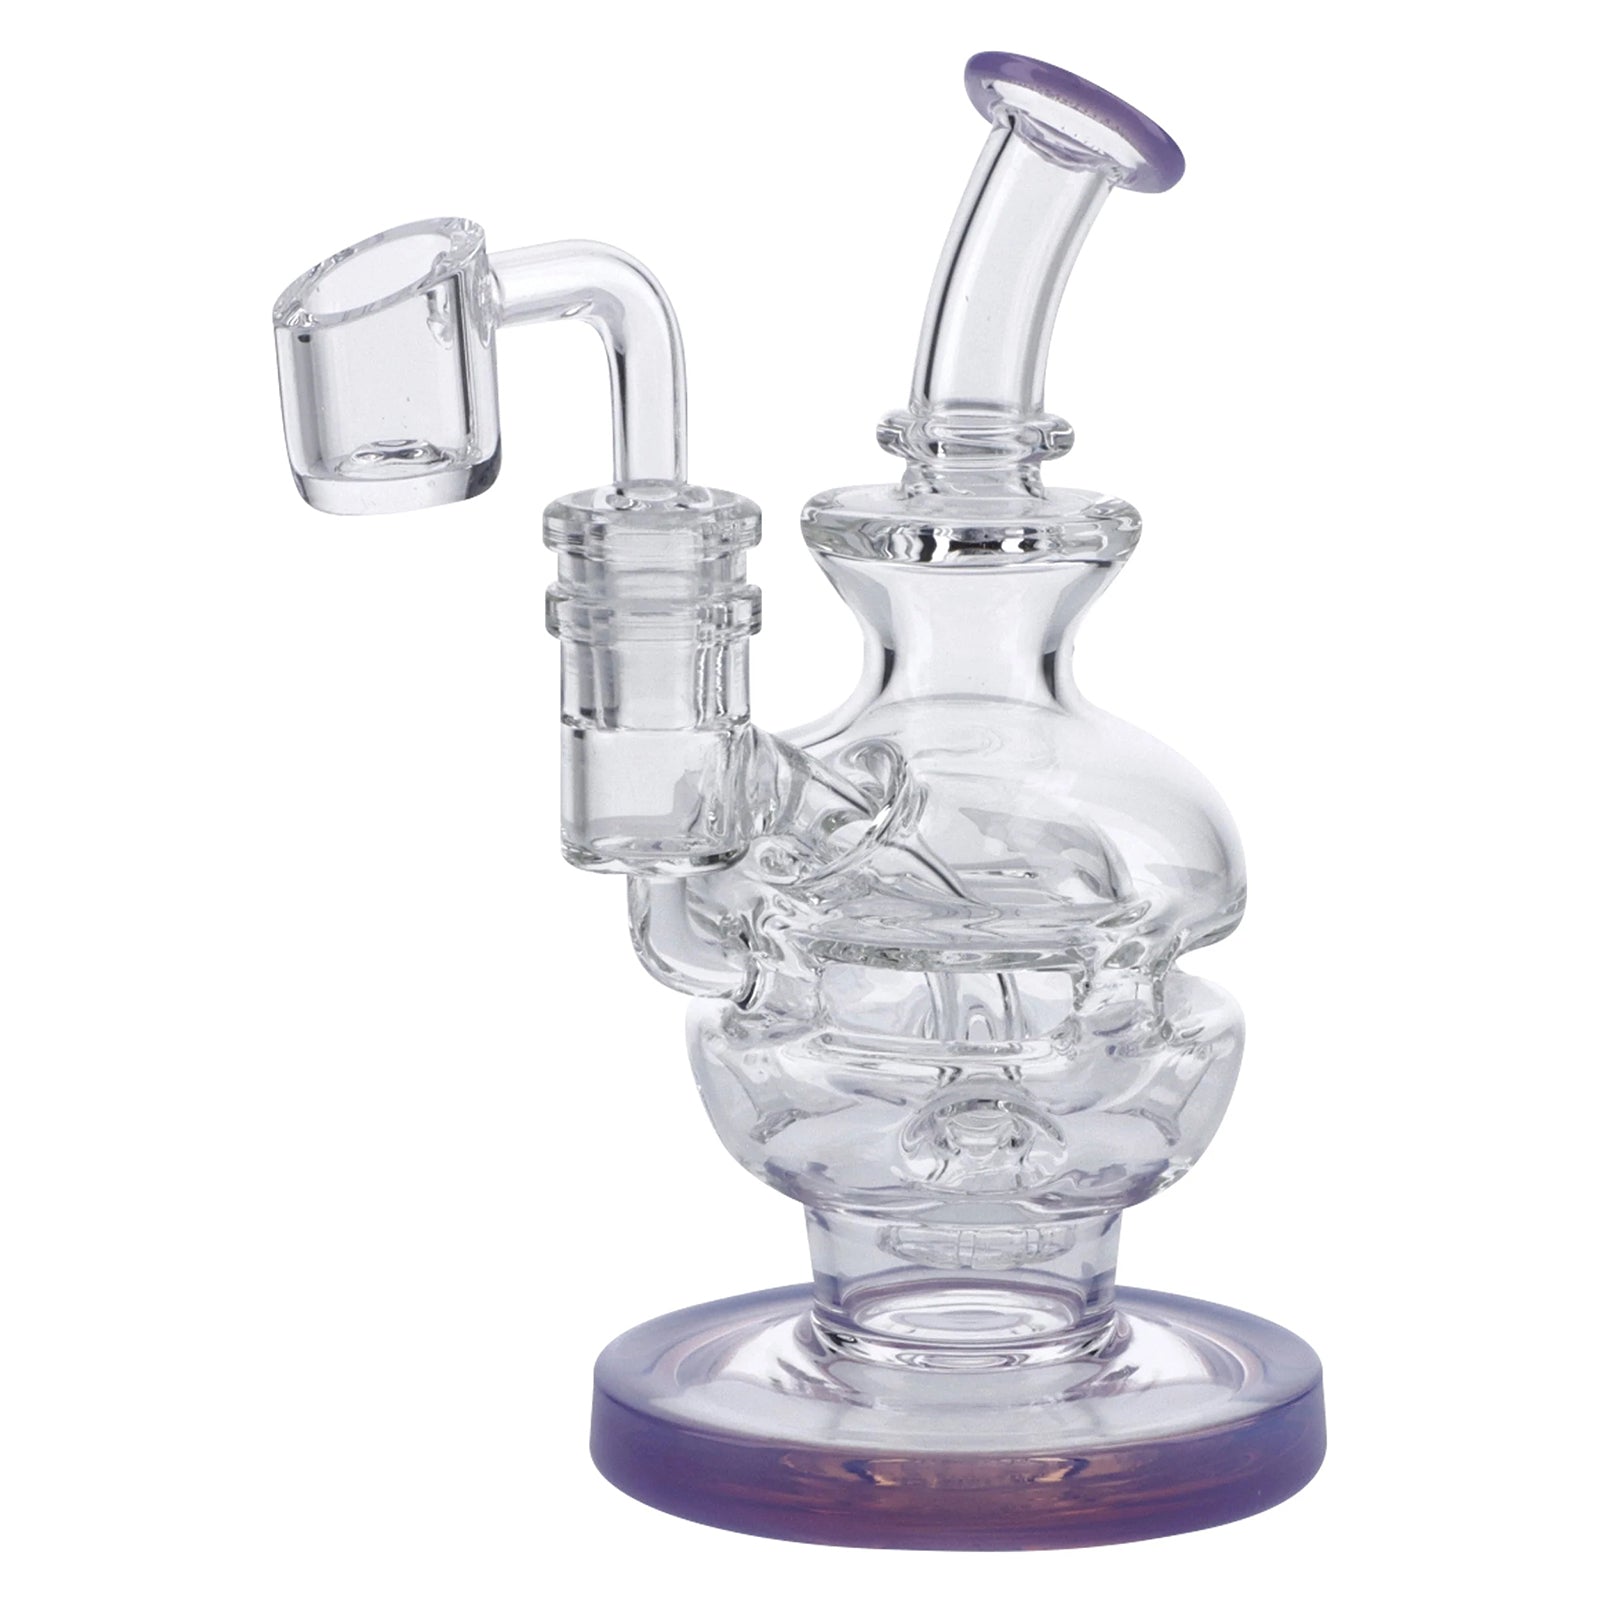 6" Swiss Perc Recycler Rig with Bent Neck